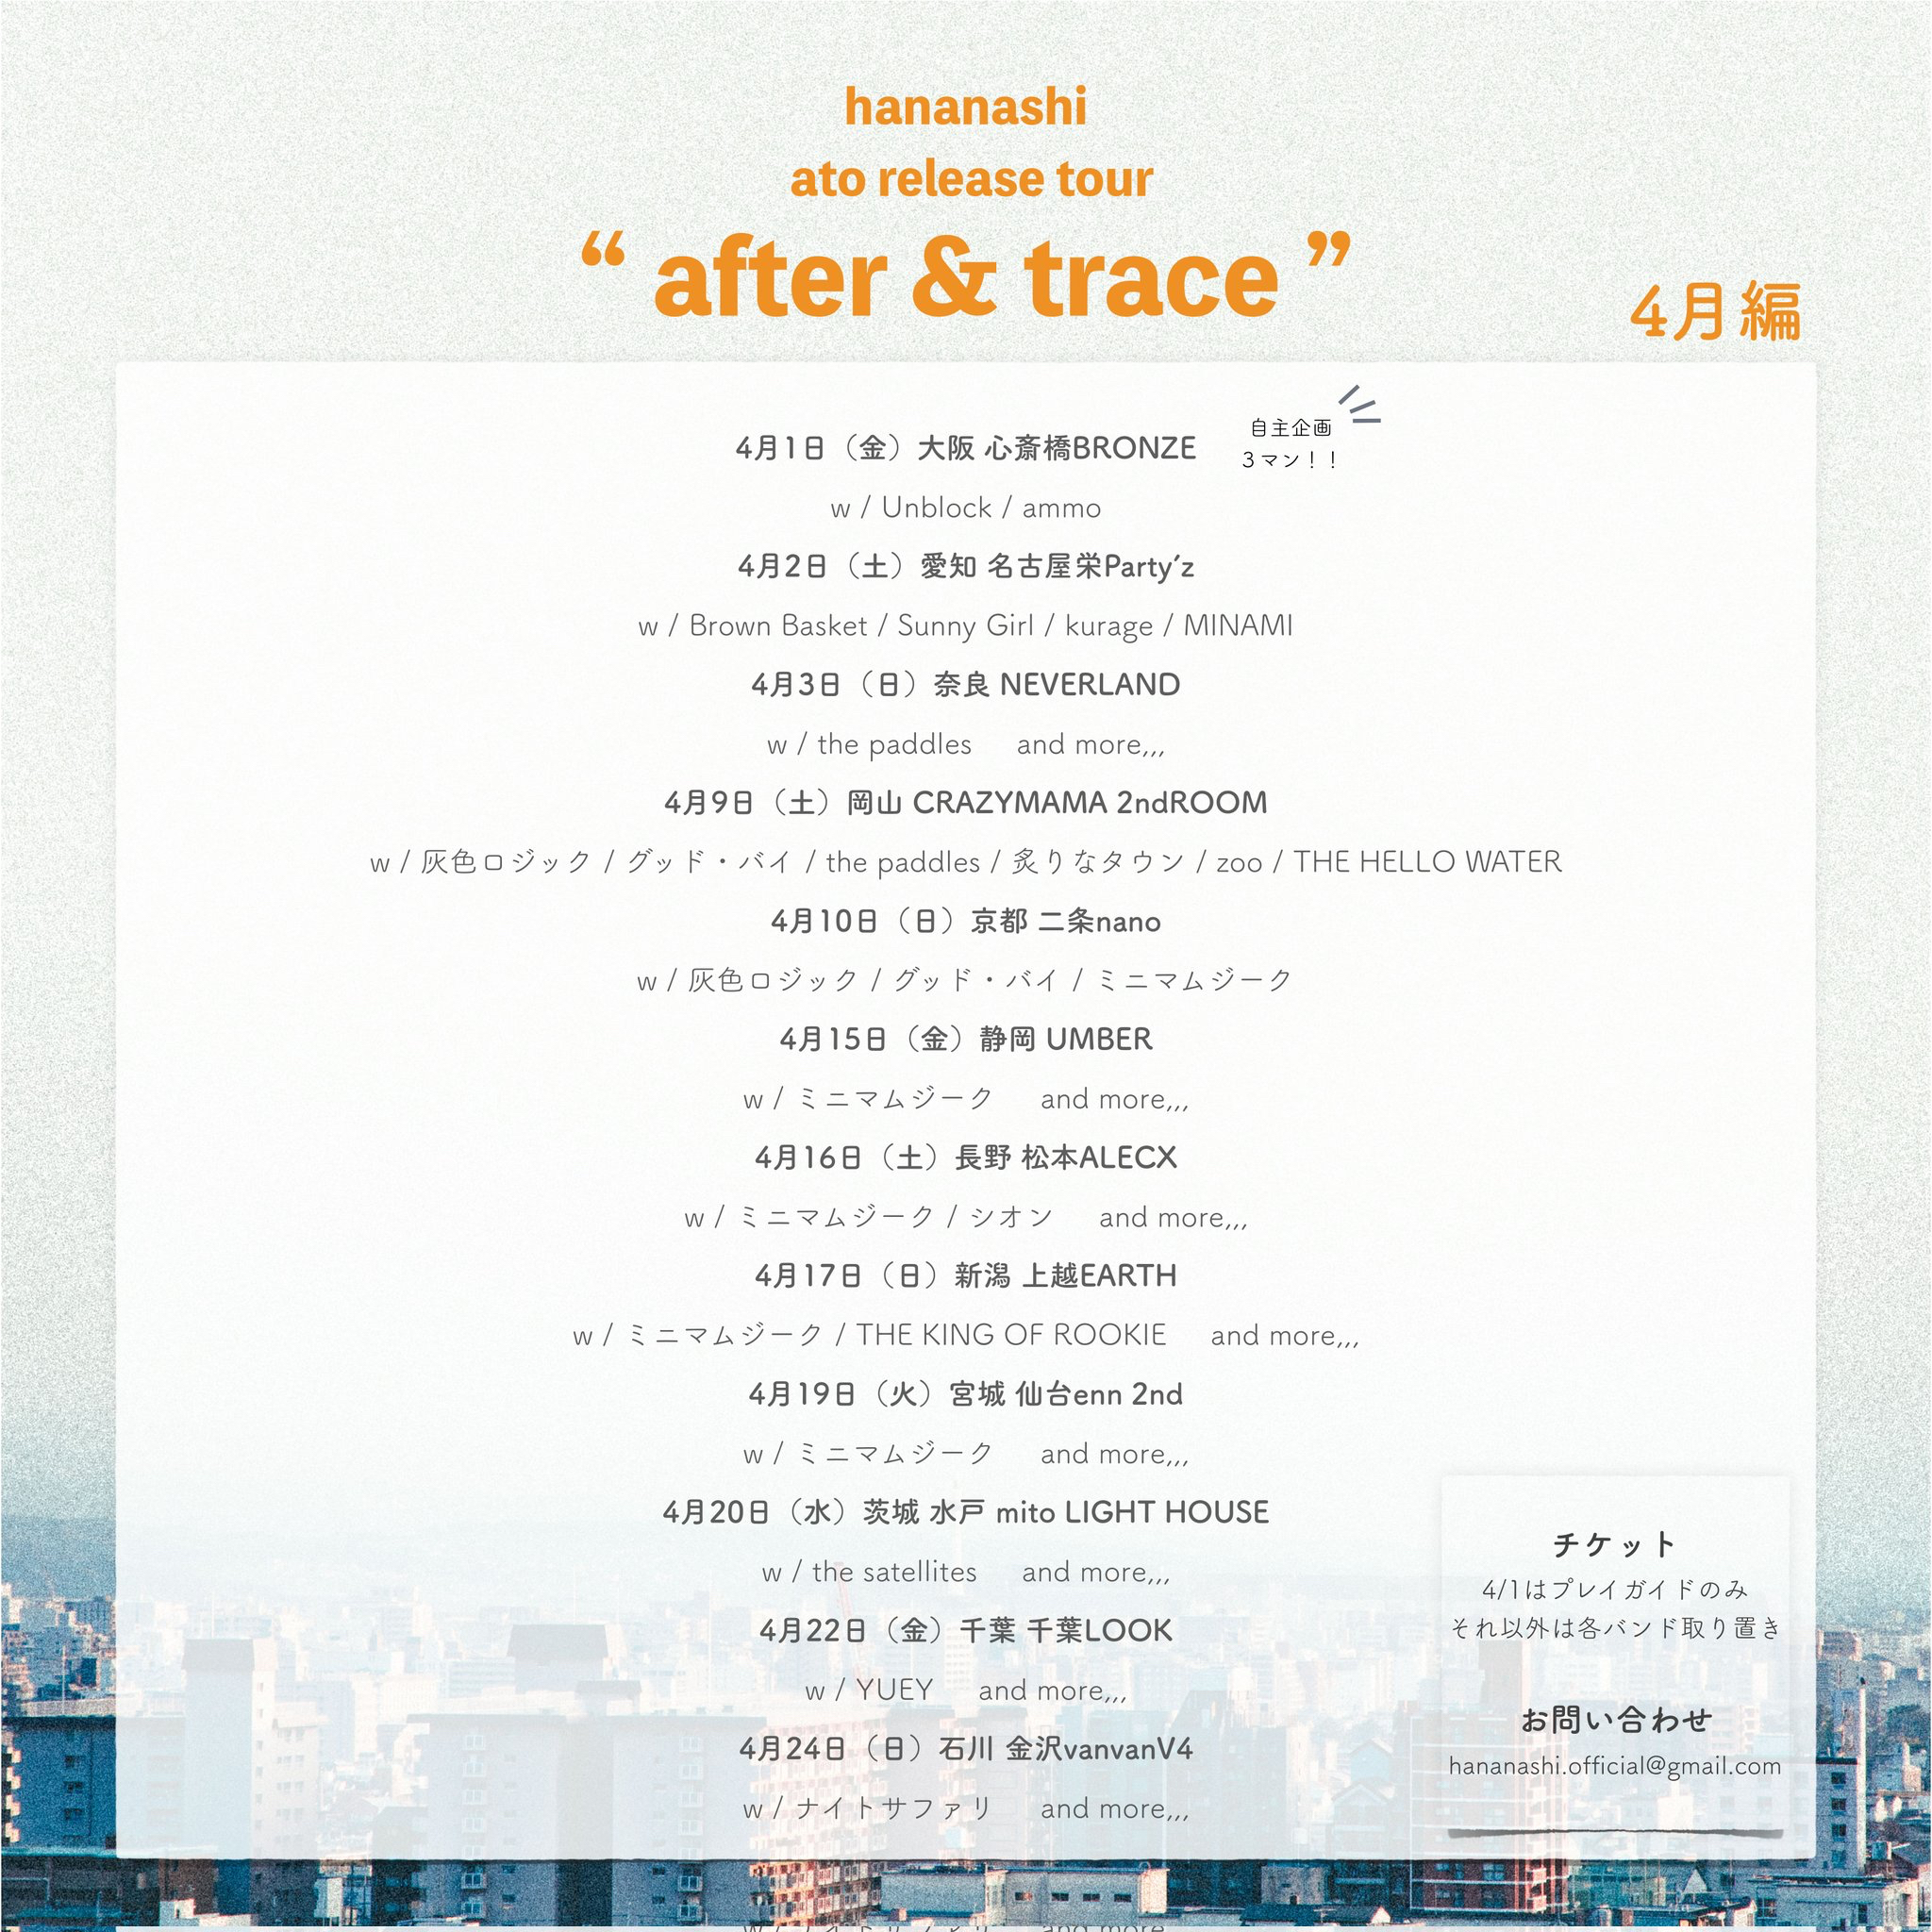 hananashi ato release tour " after & trace "